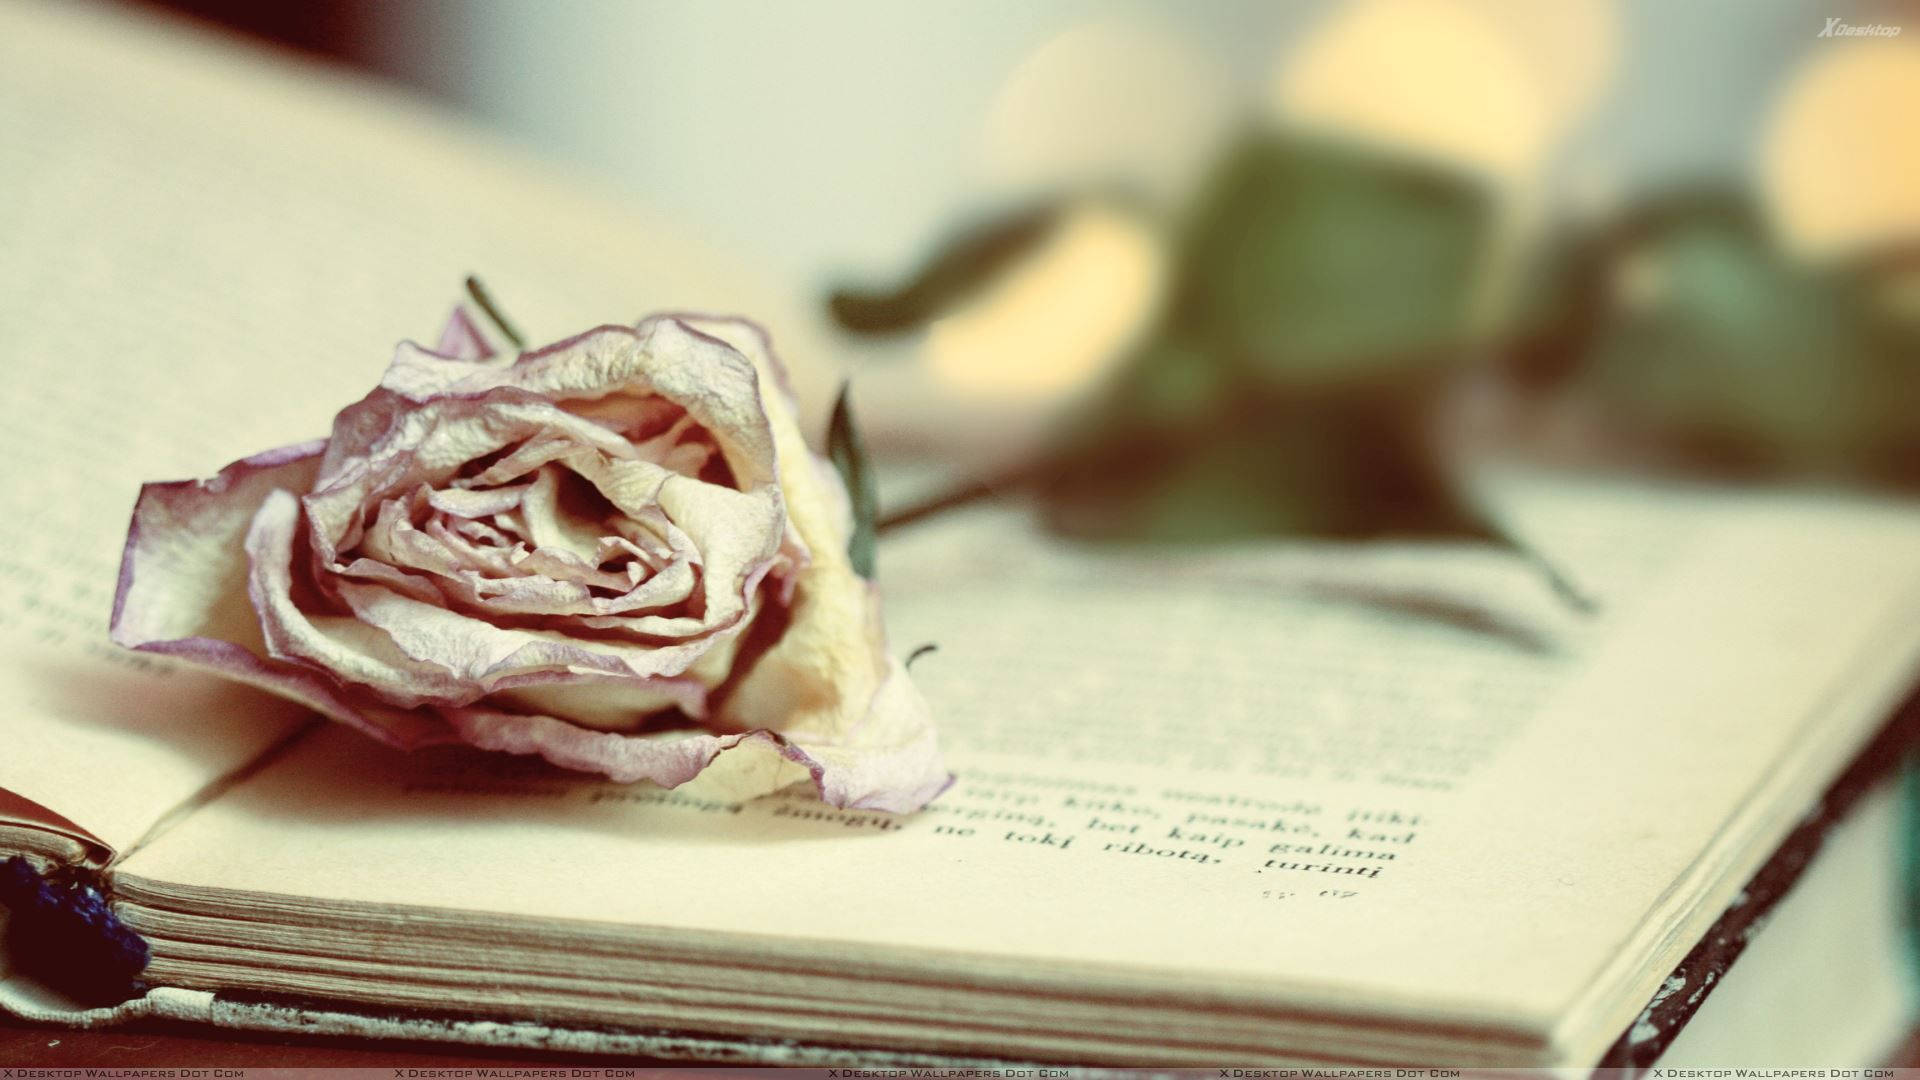 Dry rose with its stem on an open book wallpaper.